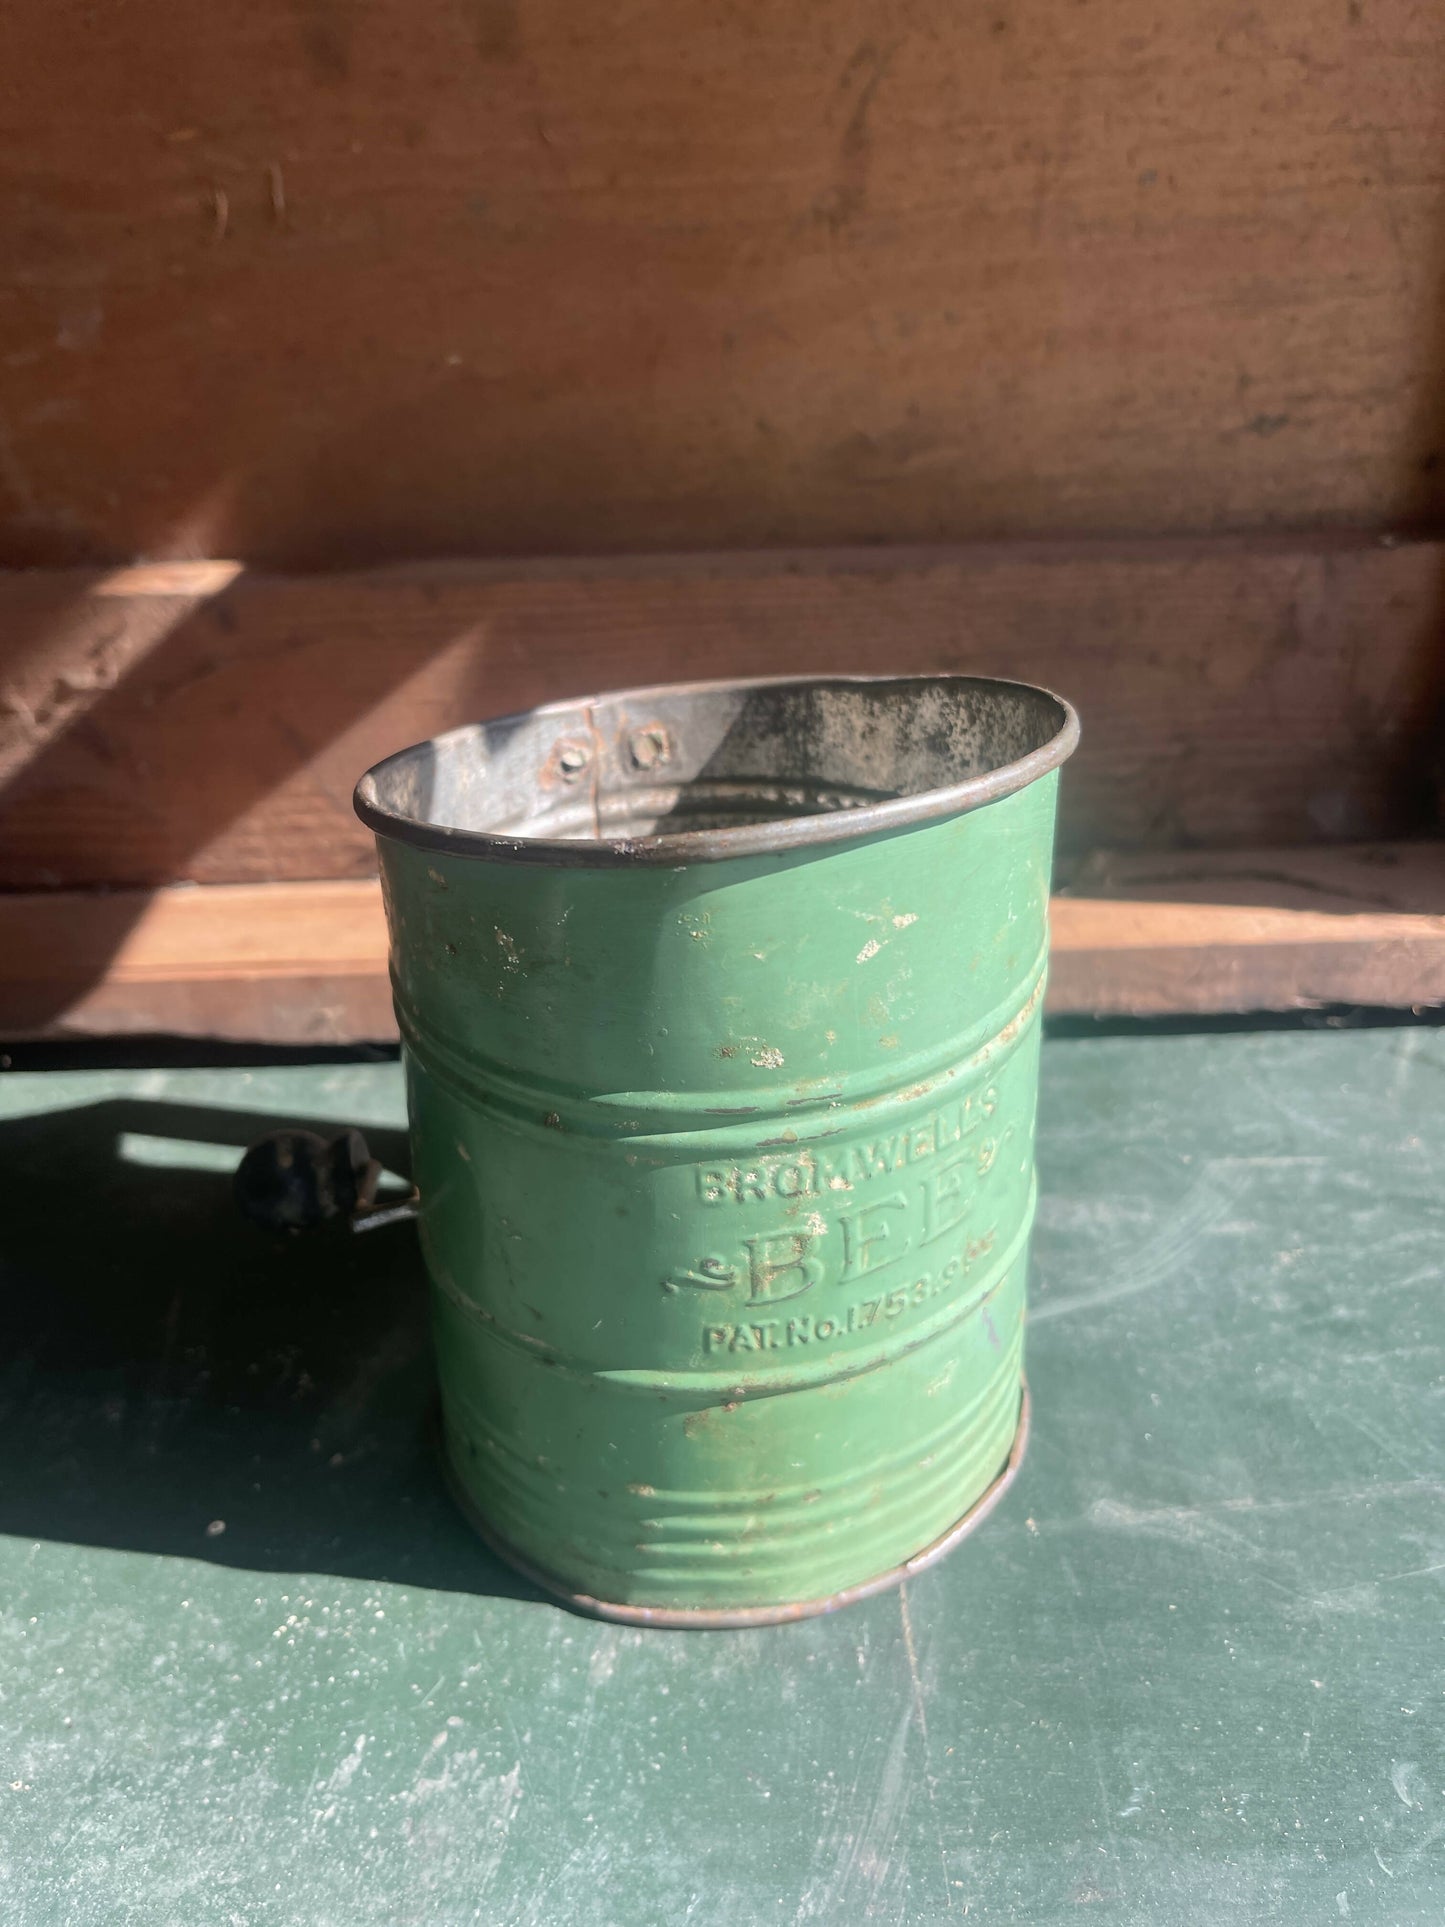 Bromwell's "Bee" Flour Sifter - Green